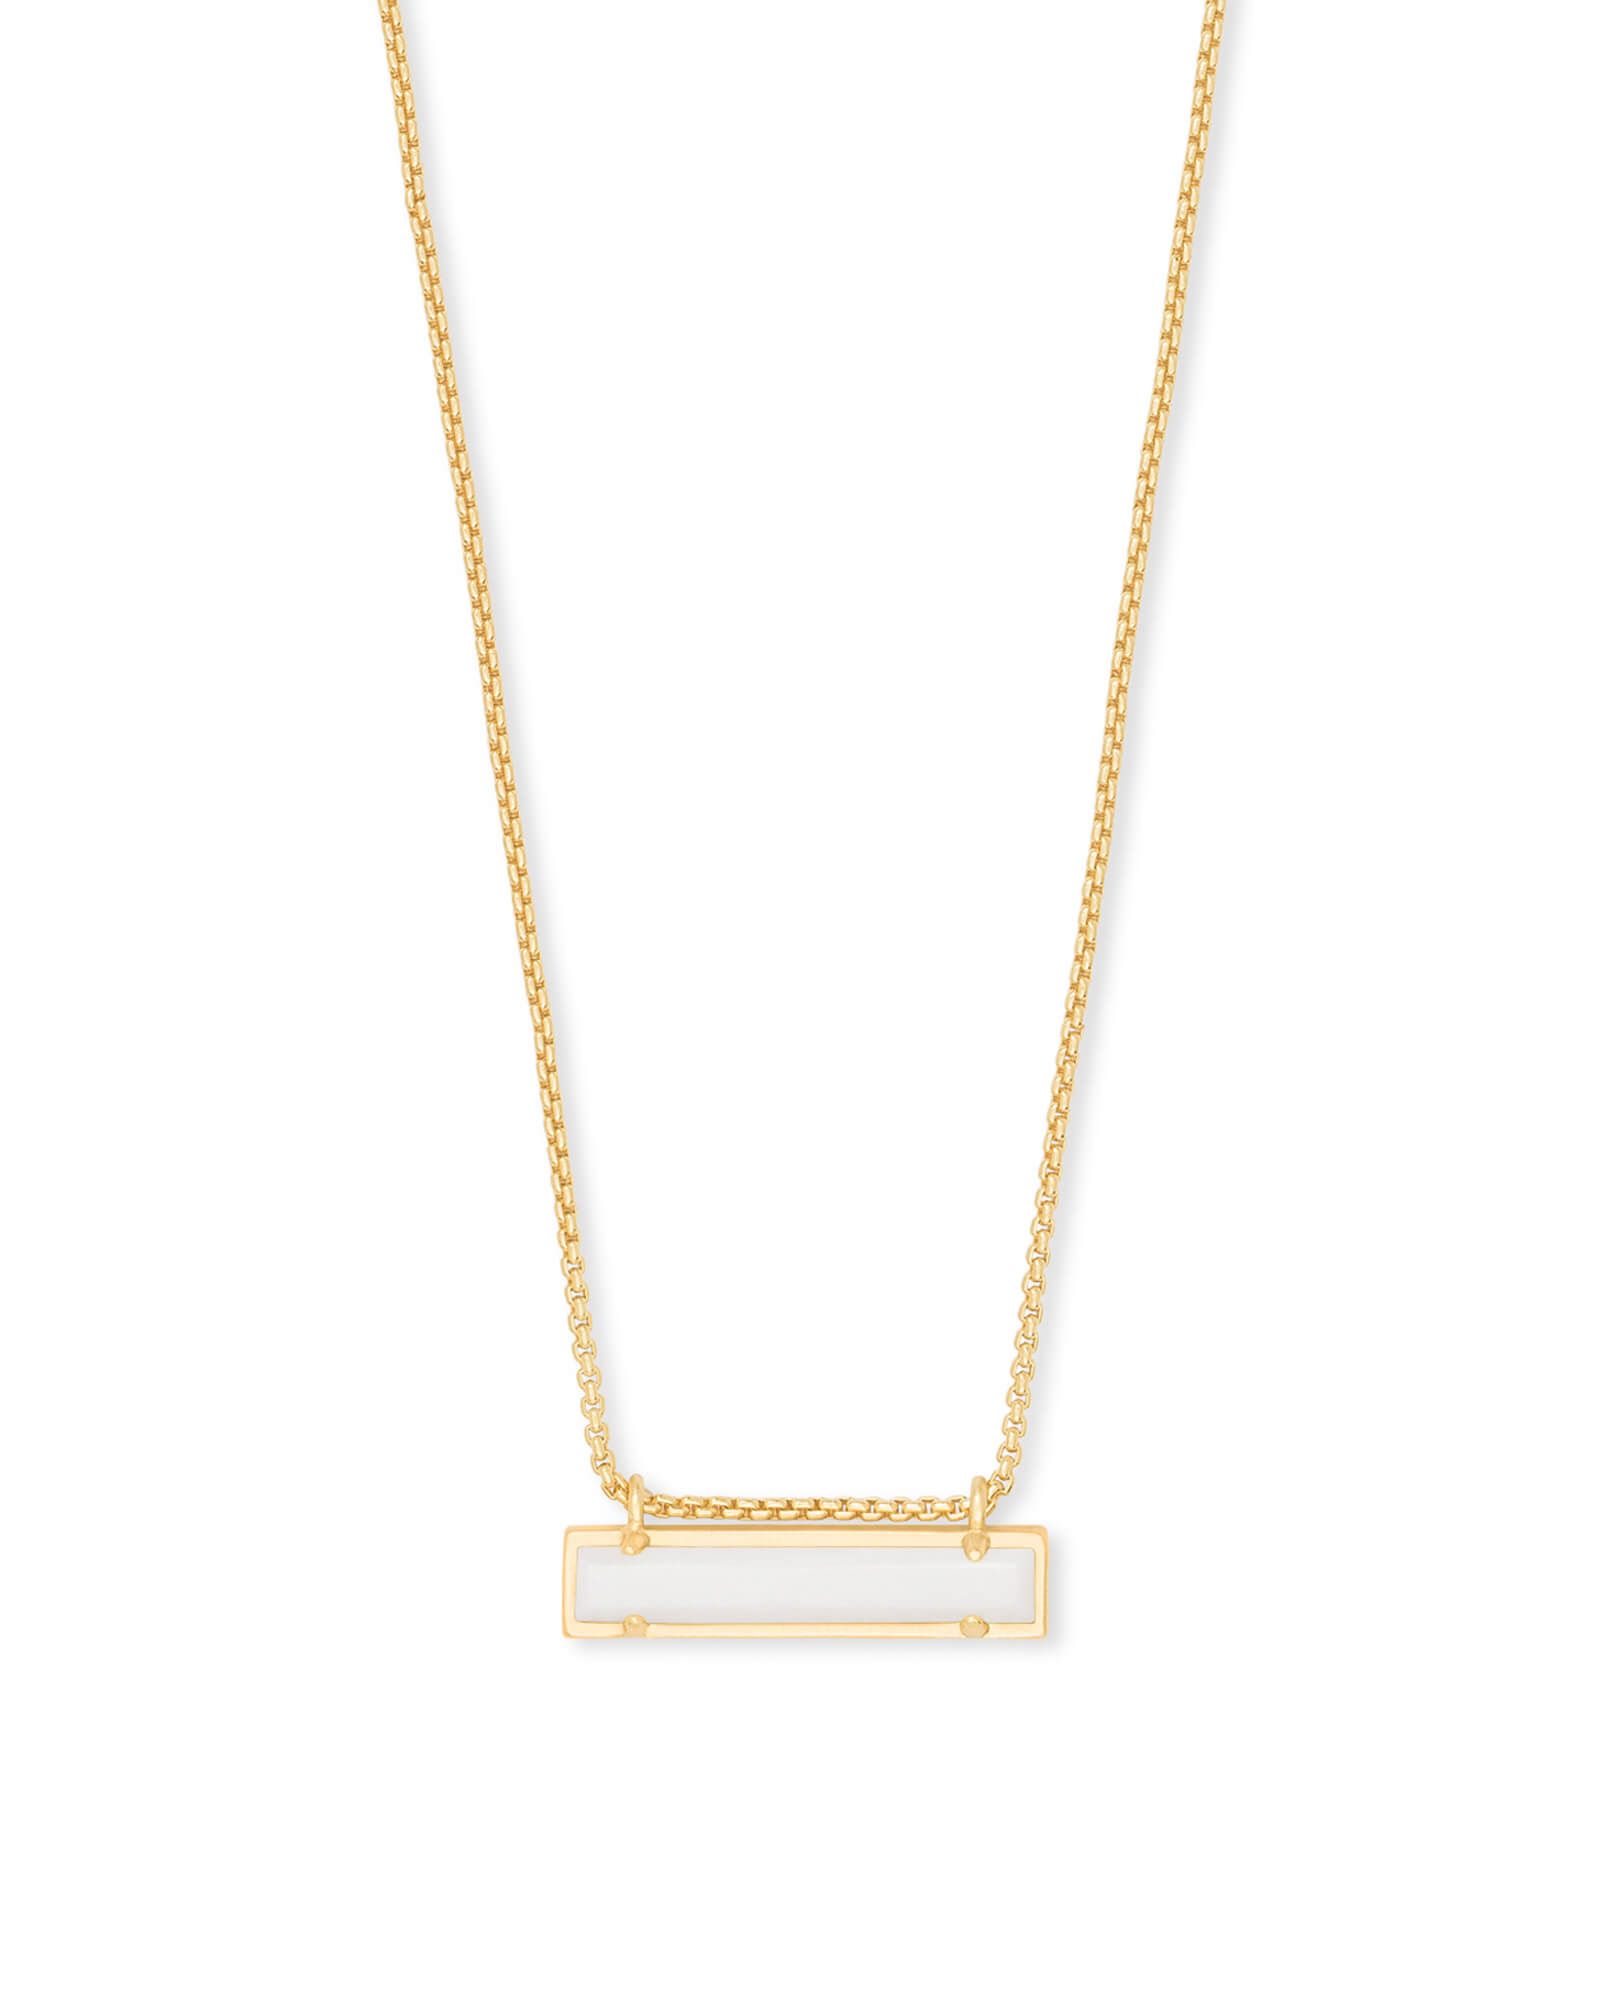 Leanor Gold Pendant Necklace in White Pearl | Kendra Scott